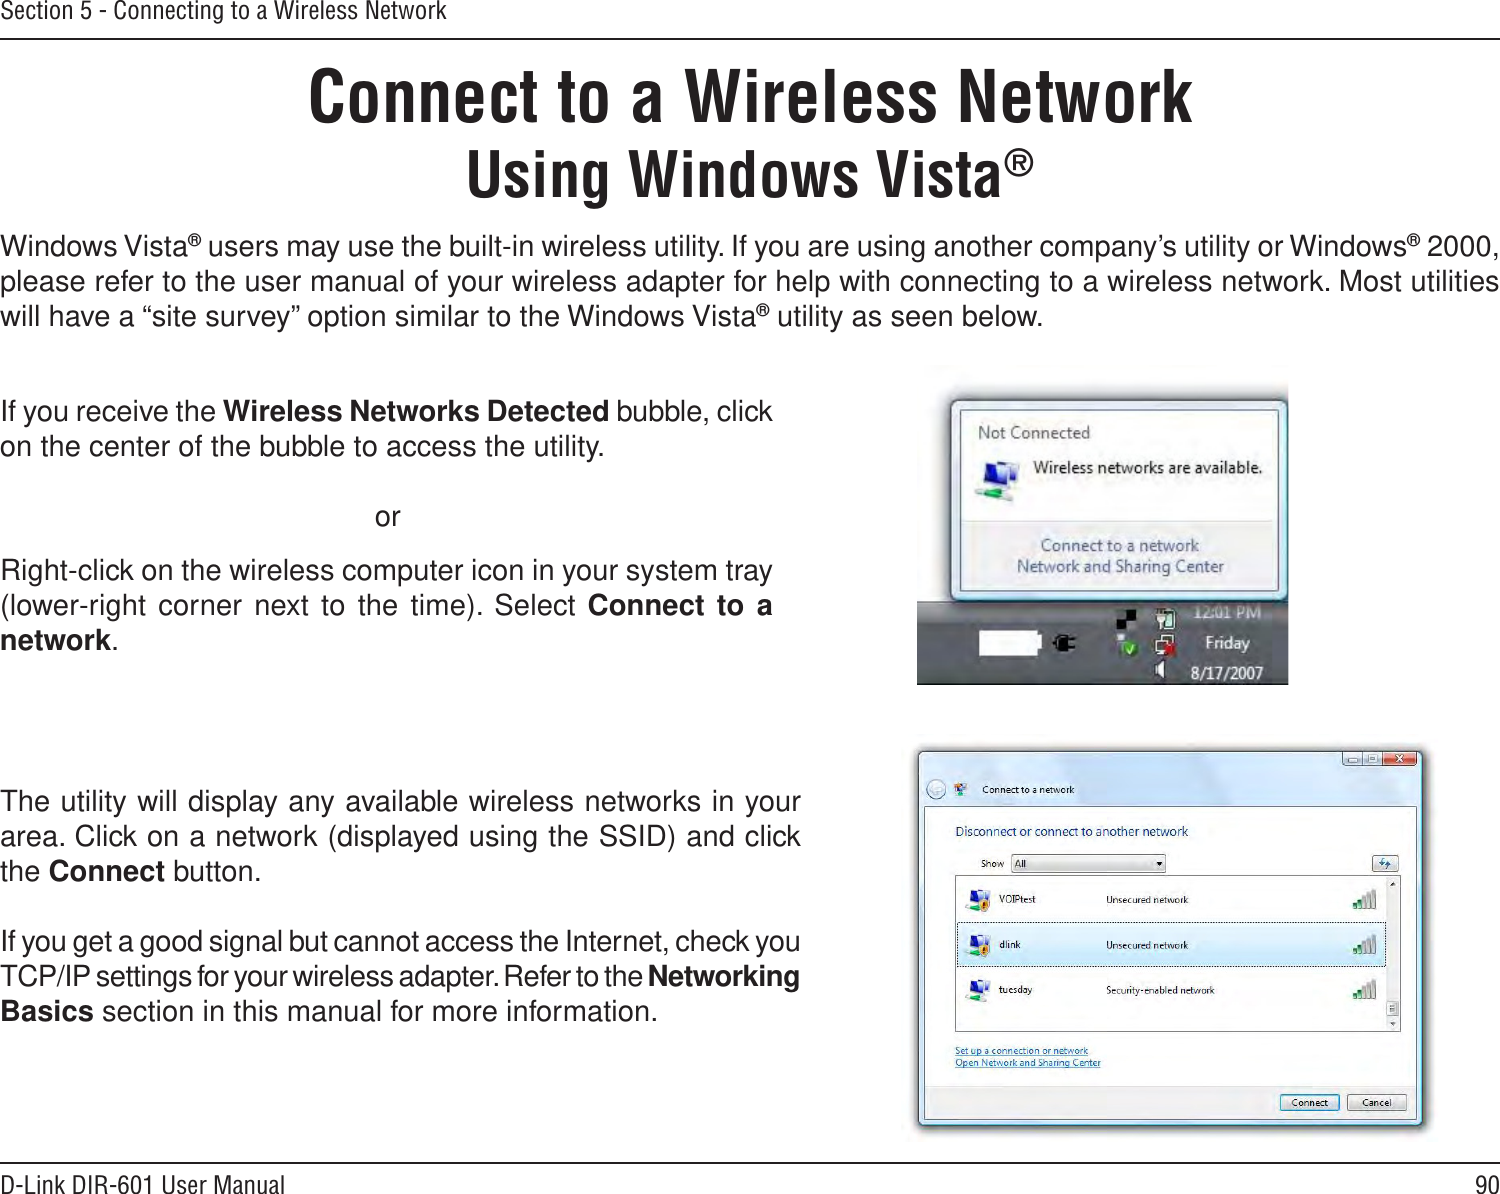 90D-Link DIR-601 User ManualSection 5 - Connecting to a Wireless NetworkConnect to a Wireless NetworkUsing Windows Vista®Windows Vista® users may use the built-in wireless utility. If you are using another company’s utility or Windows® 2000, please refer to the user manual of your wireless adapter for help with connecting to a wireless network. Most utilities will have a “site survey” option similar to the Windows Vista® utility as seen below.Right-click on the wireless computer icon in your system tray (lower-right corner next to the  time). Select Connect to a network.If you receive the Wireless Networks Detected bubble, click on the center of the bubble to access the utility.     orThe utility will display any available wireless networks in your area. Click on a network (displayed using the SSID) and click the Connect button.If you get a good signal but cannot access the Internet, check you TCP/IP settings for your wireless adapter. Refer to the Networking Basics section in this manual for more information.